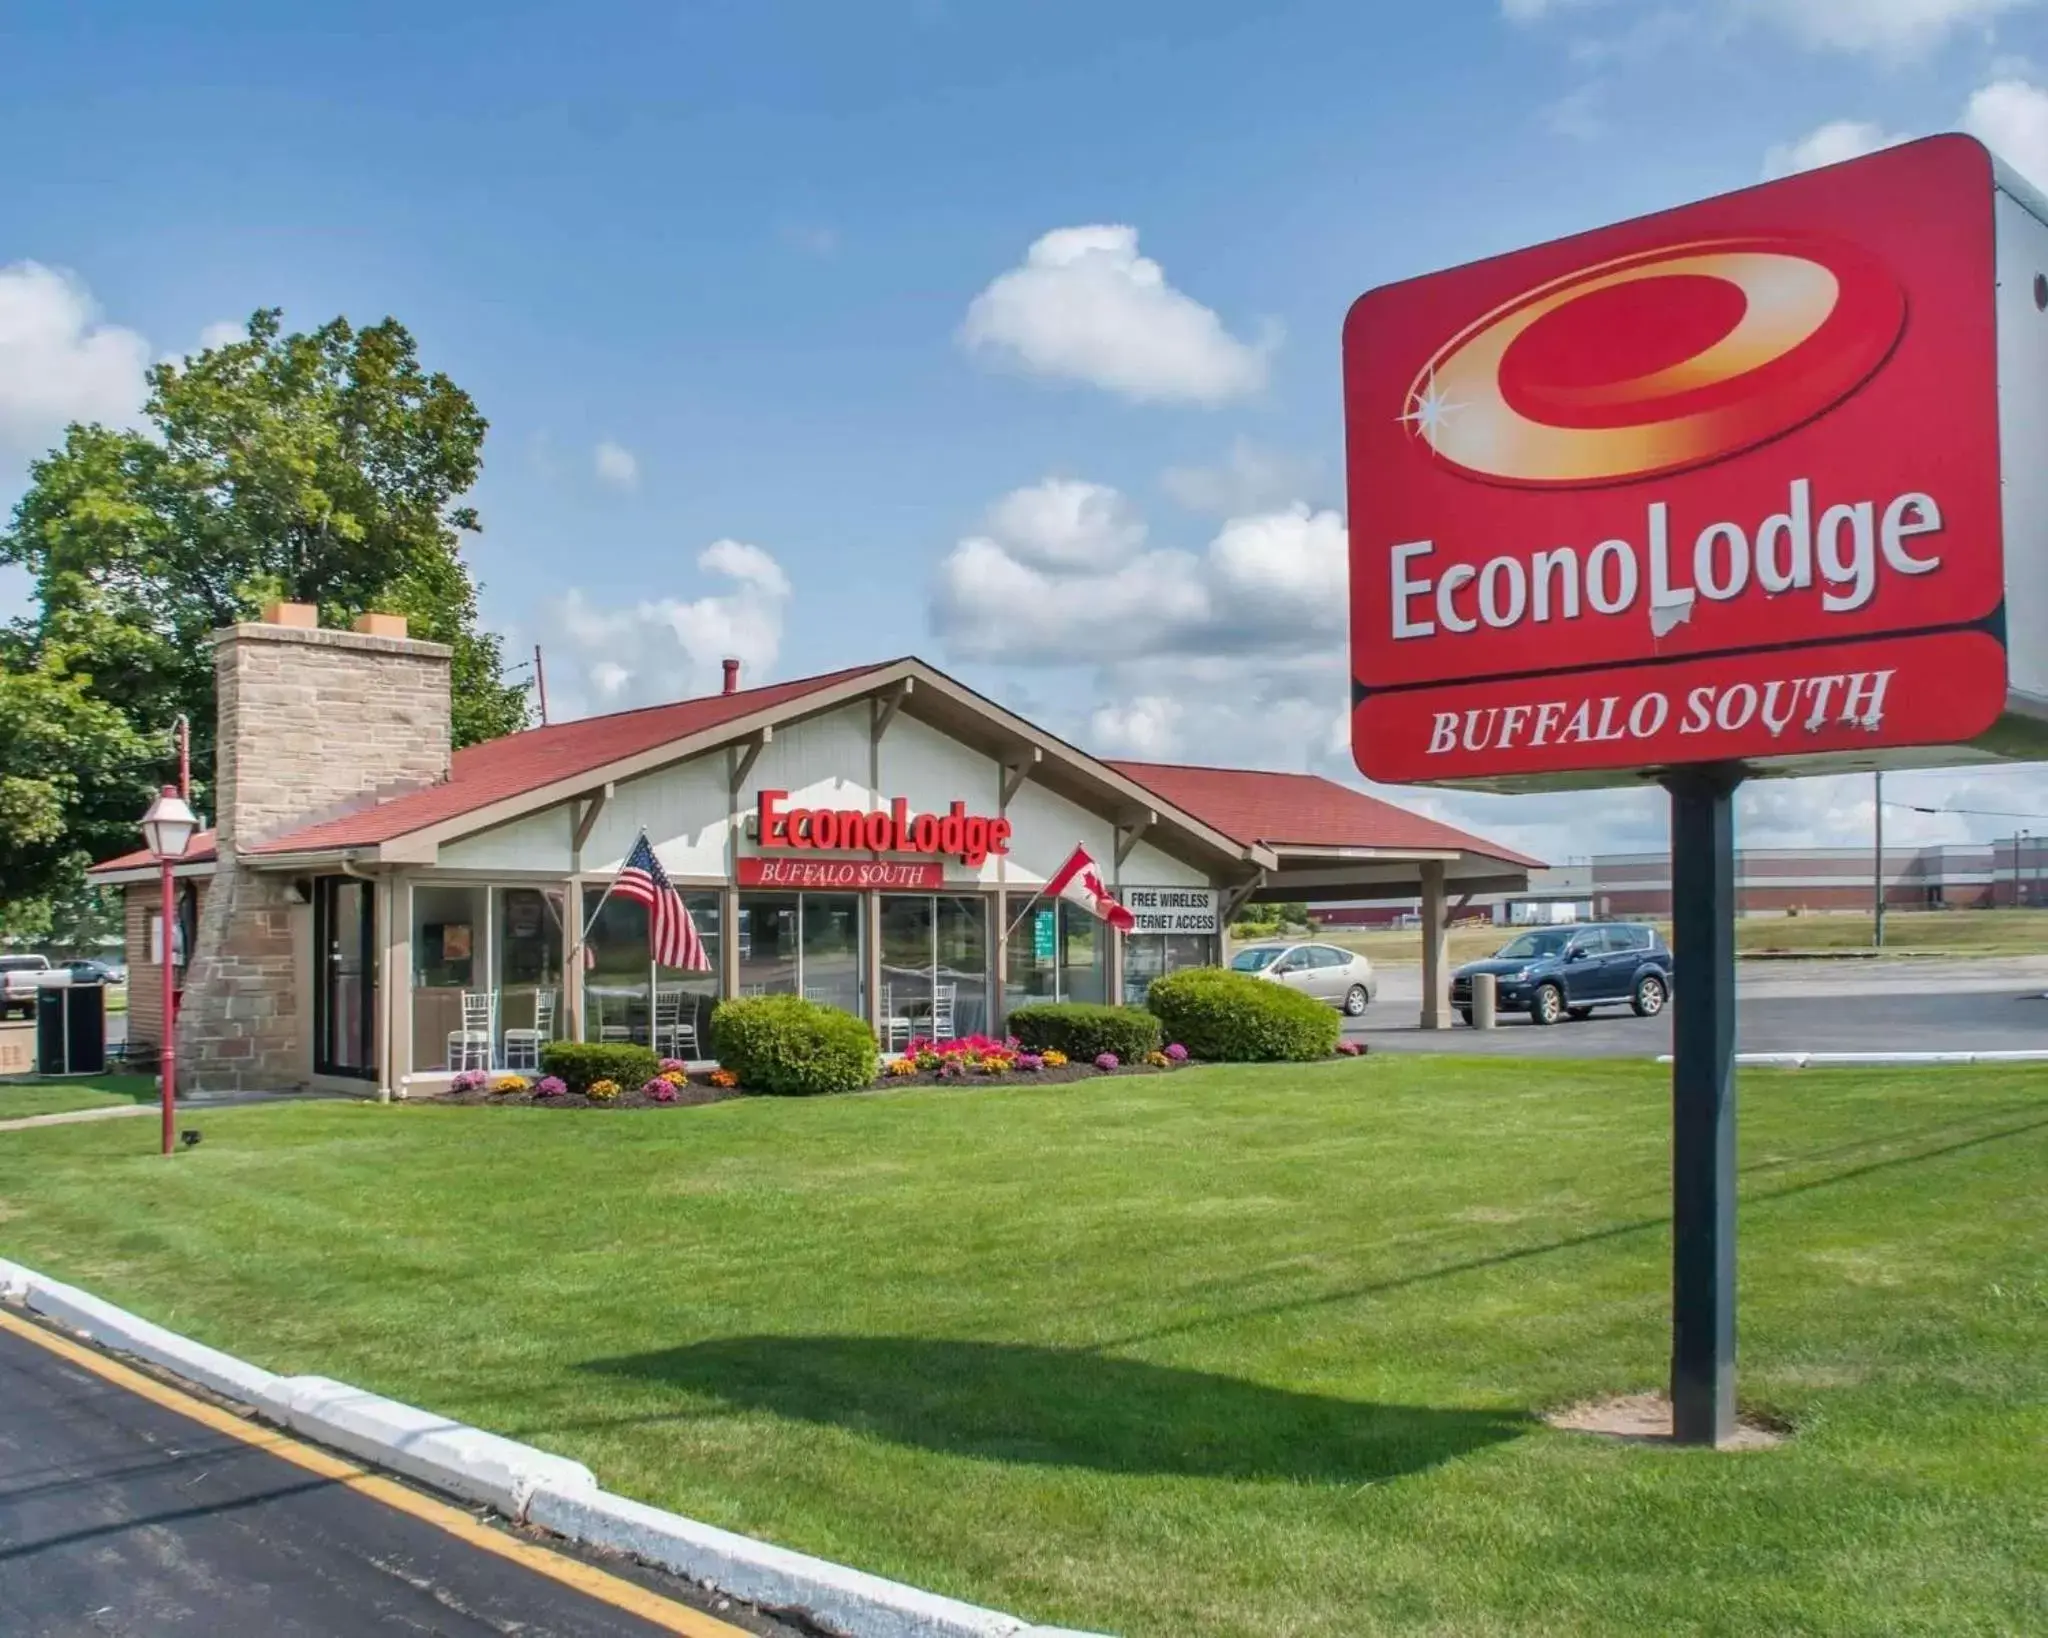 Property Building in Econo Lodge Buffalo South